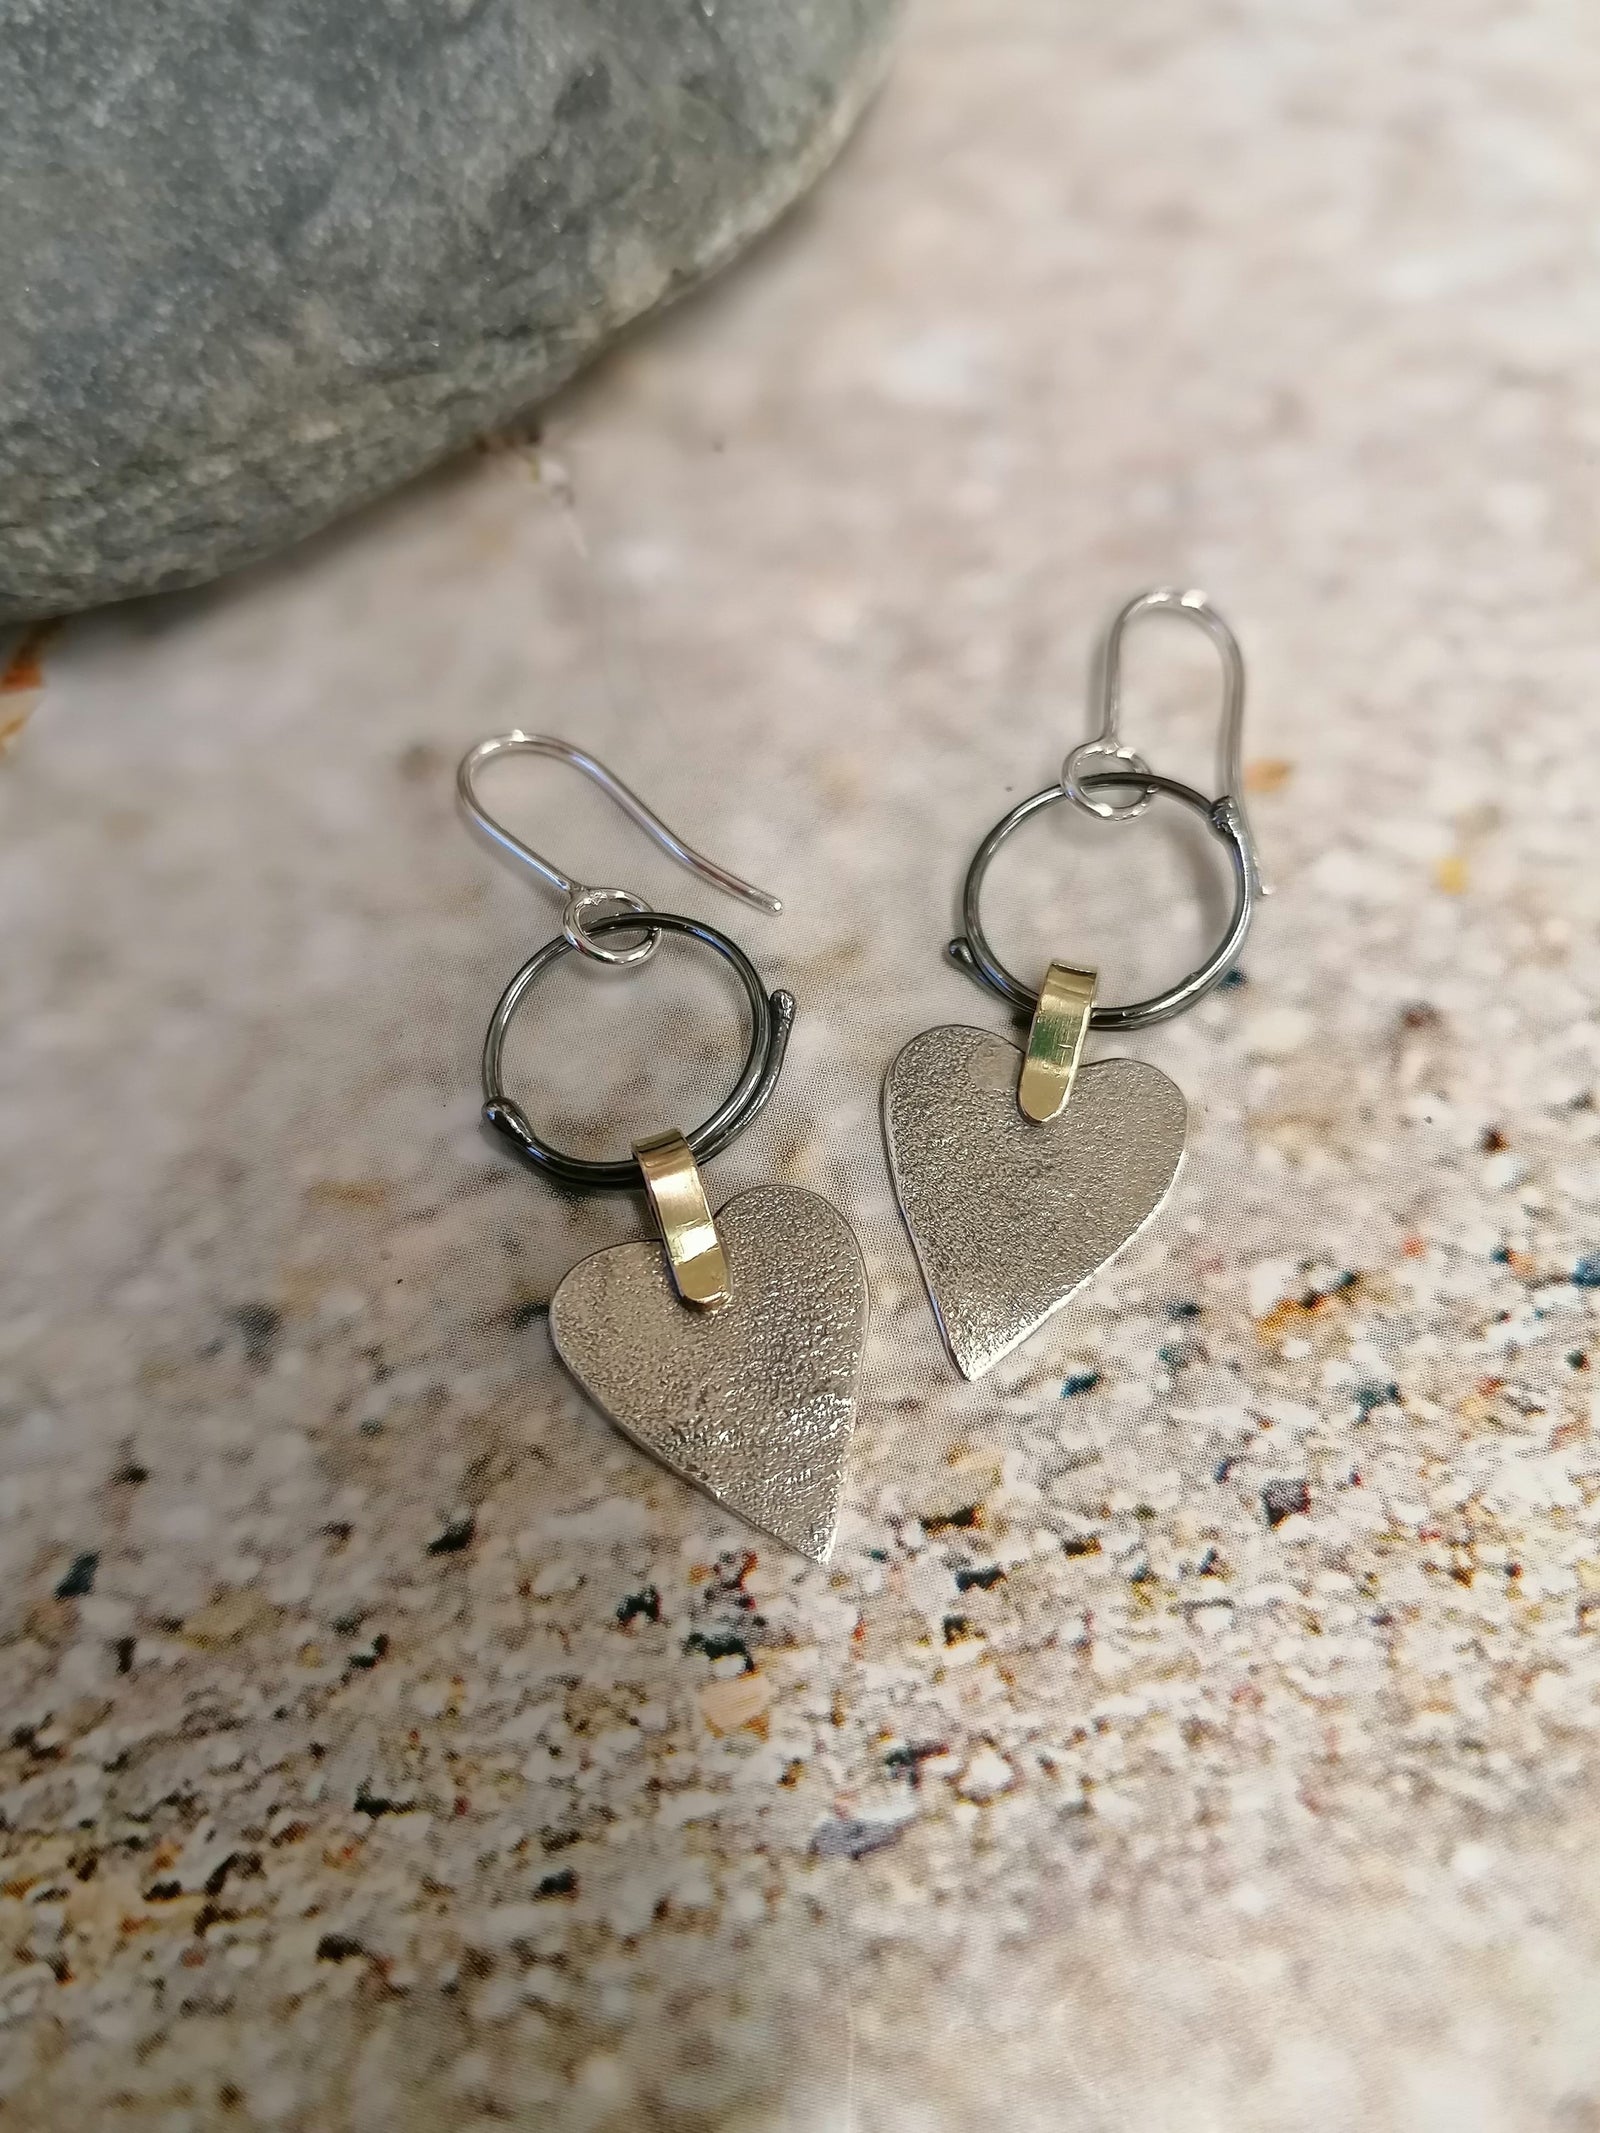 "SA EA95 Silver Heart Drop Earrings, Oxidised Hoop and Gold Link' by Sandra Austin jewellery, available at Padstow Gallery, Cornwall